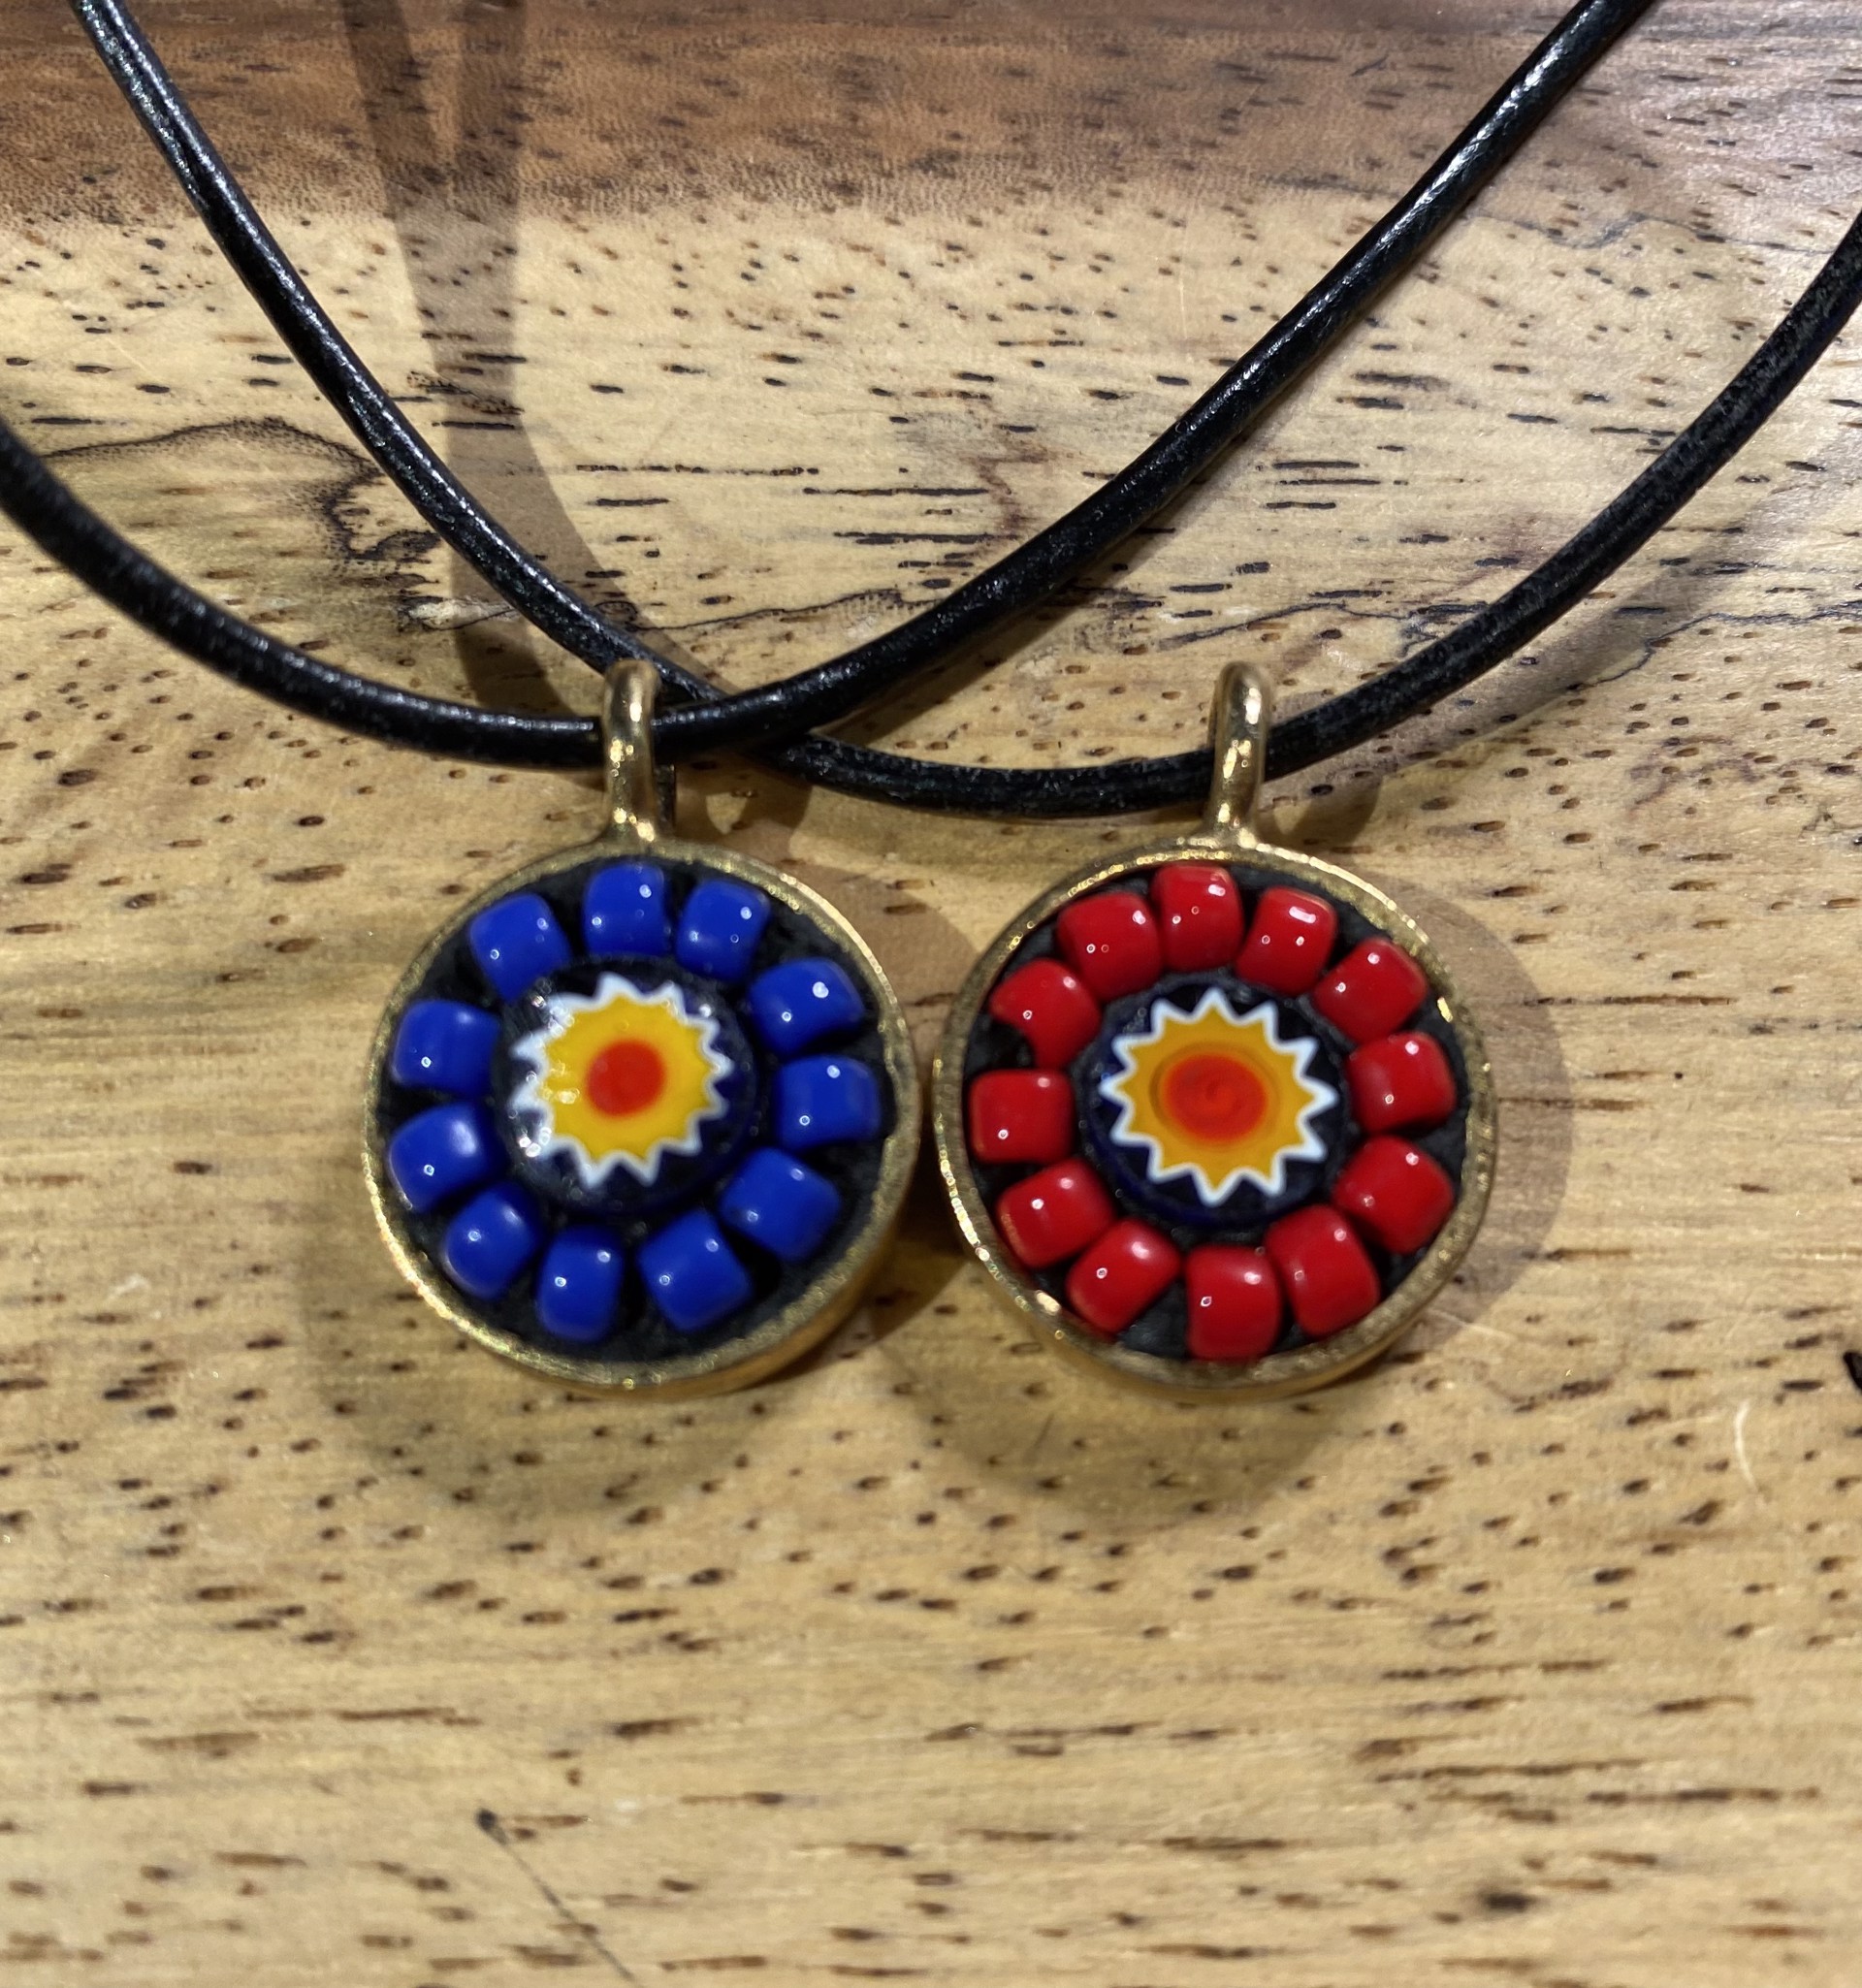 Pendant with one Milliefiori and beads by Cherie Bosela